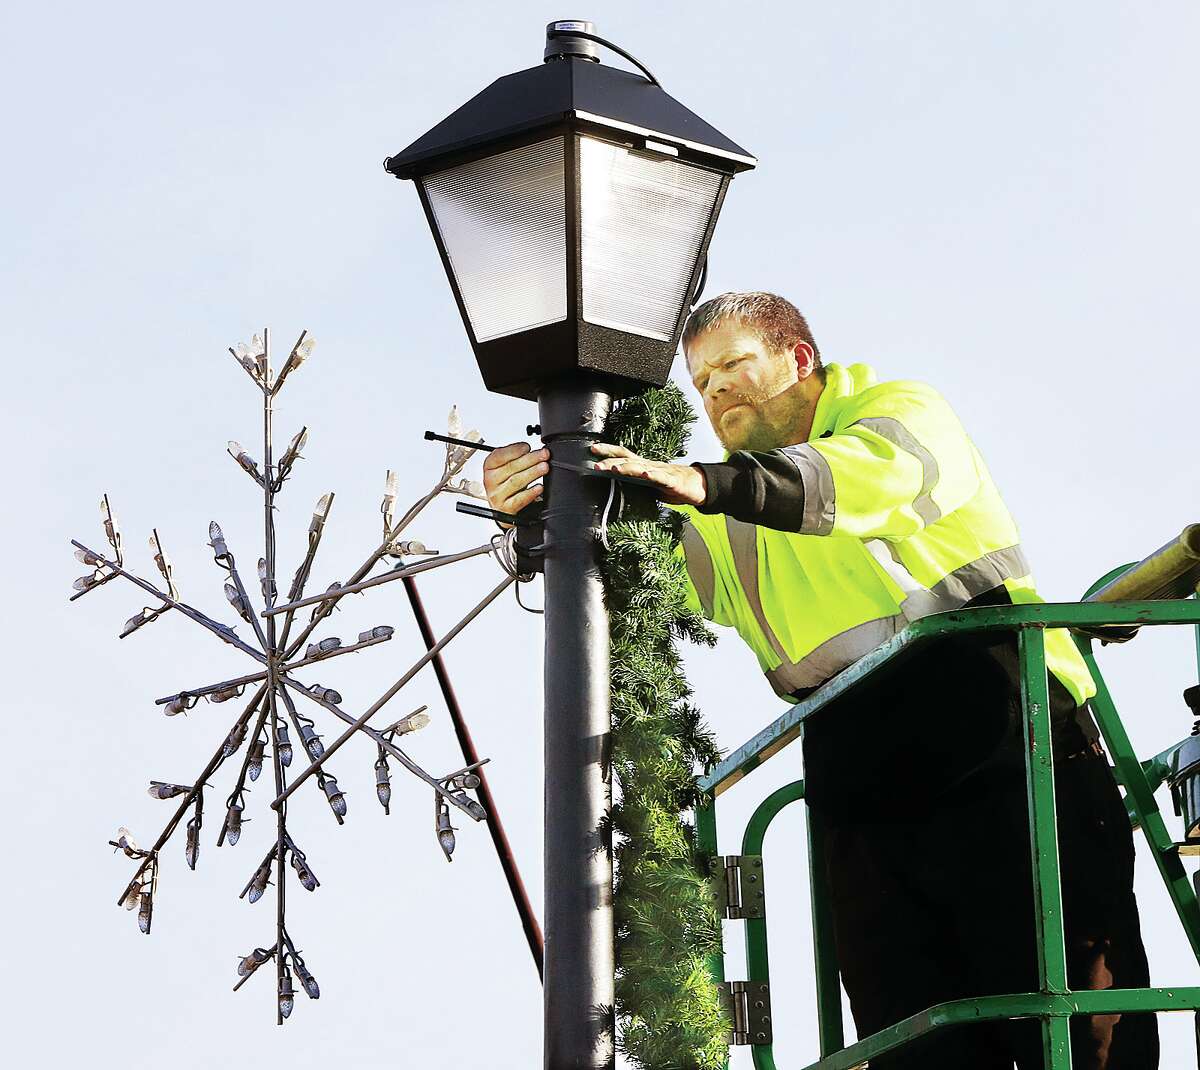 John Badman|The Telegraph Wood River Public Works employees took advantage of Tuesday's warm weather to finish hanging Christmas decorations in the downtown area, like here at Ferguson Avenue and 2nd Street.